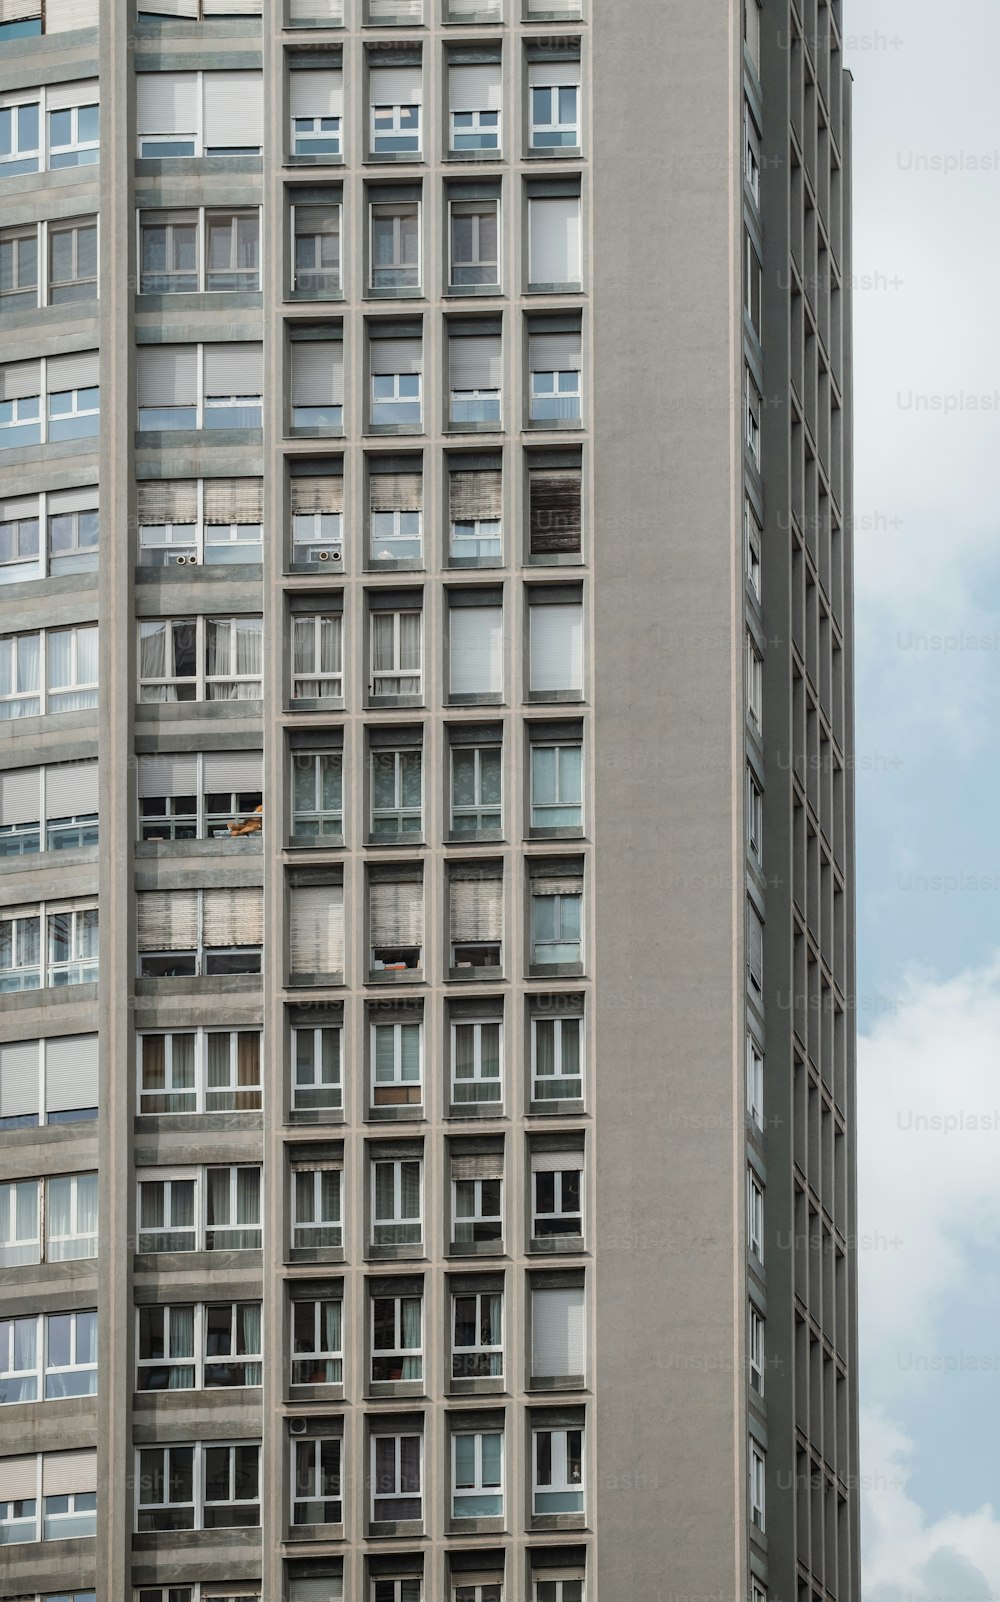 a tall building with lots of windows and balconies